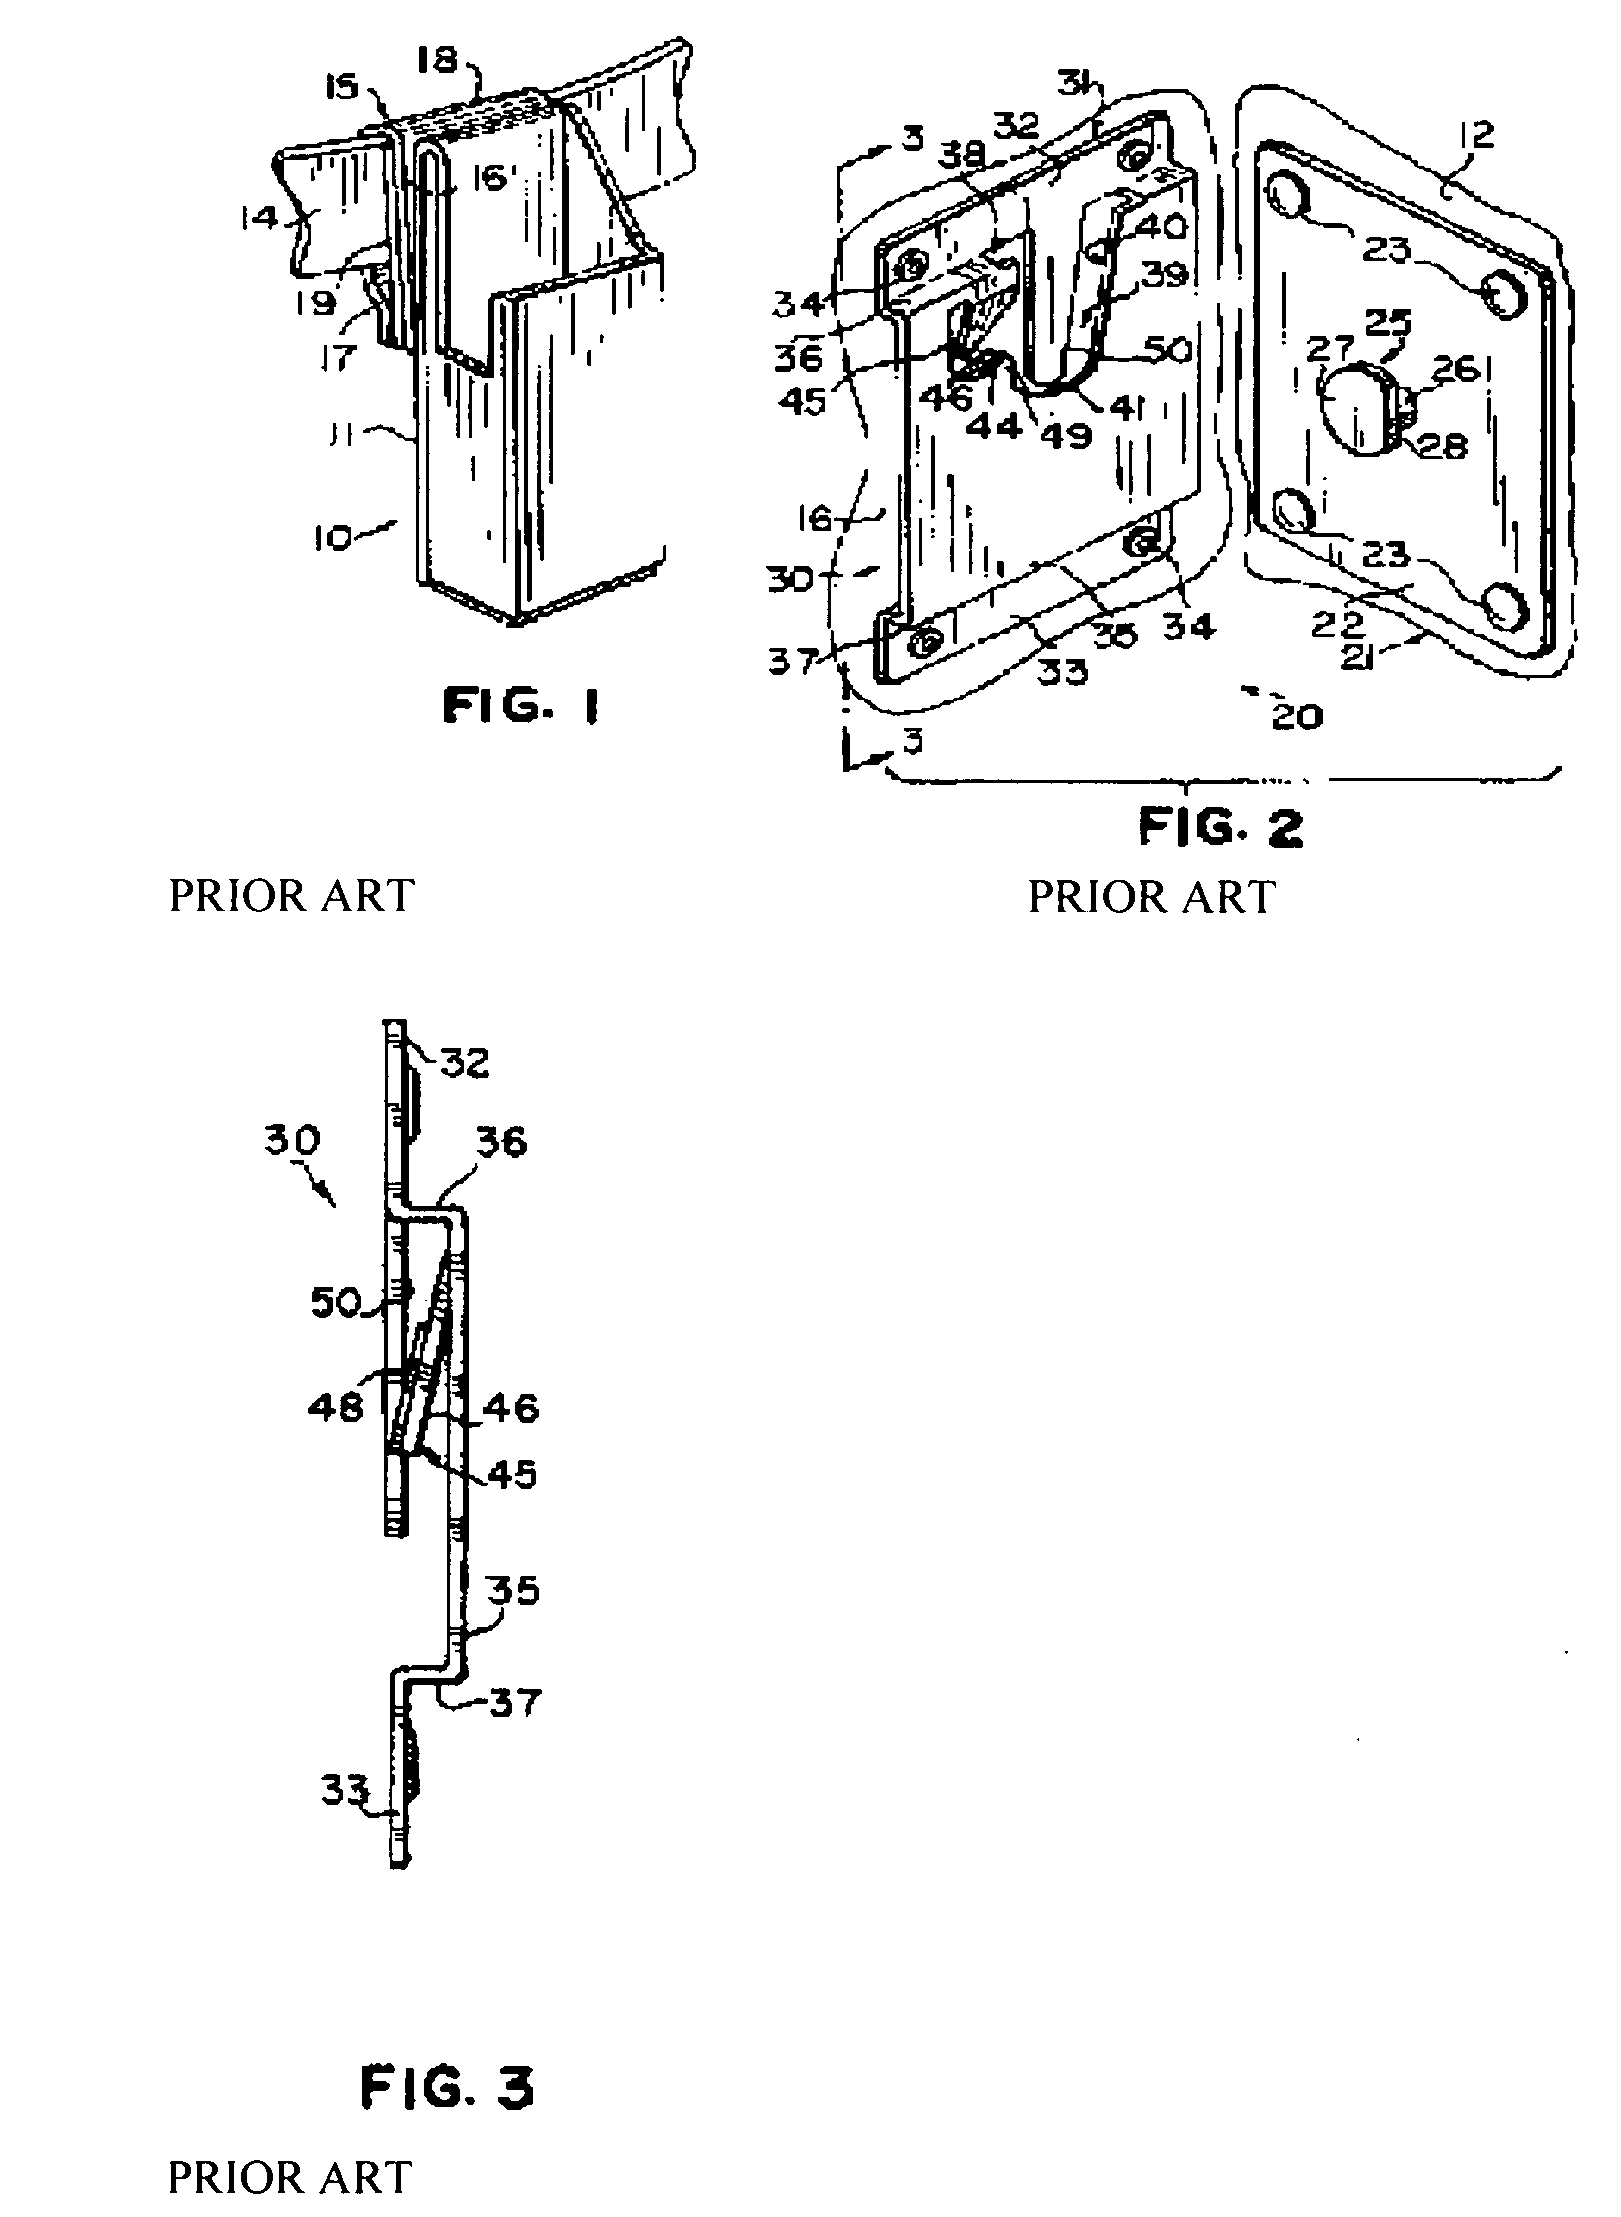 One-piece connecting or fastening apparatus inexpensively and simply manufactured